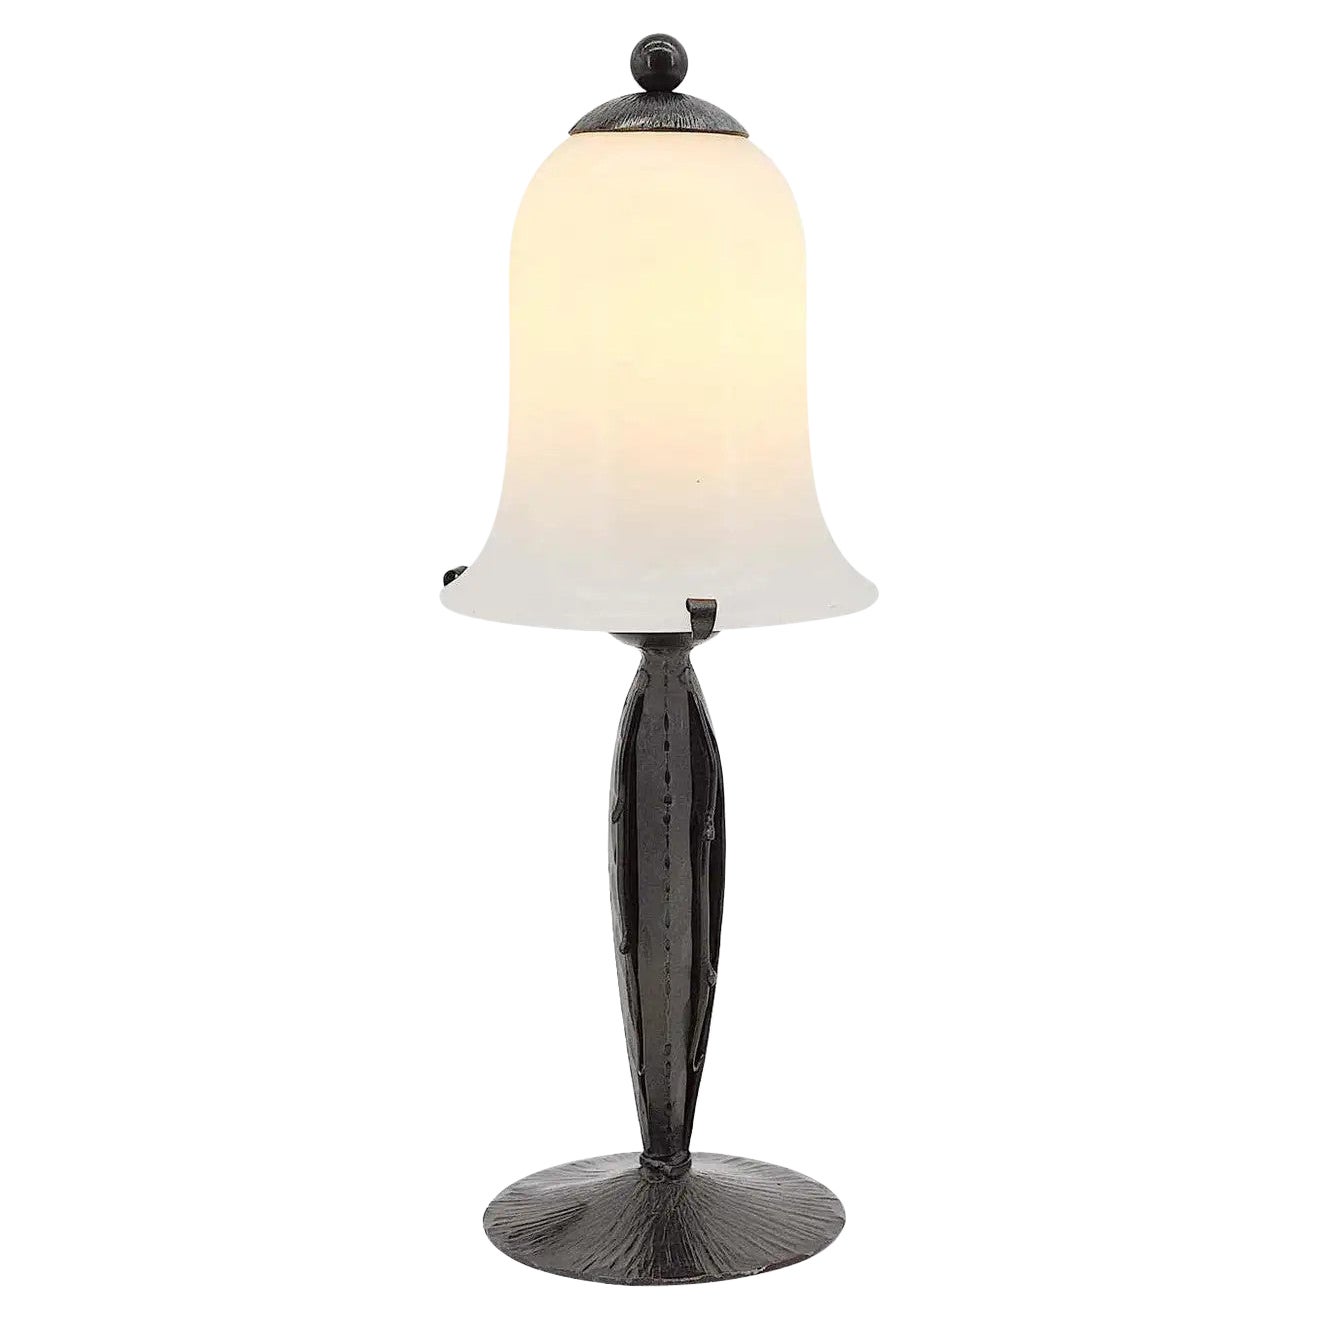 French Art Deco Alabaster Table Lamp, 1920s